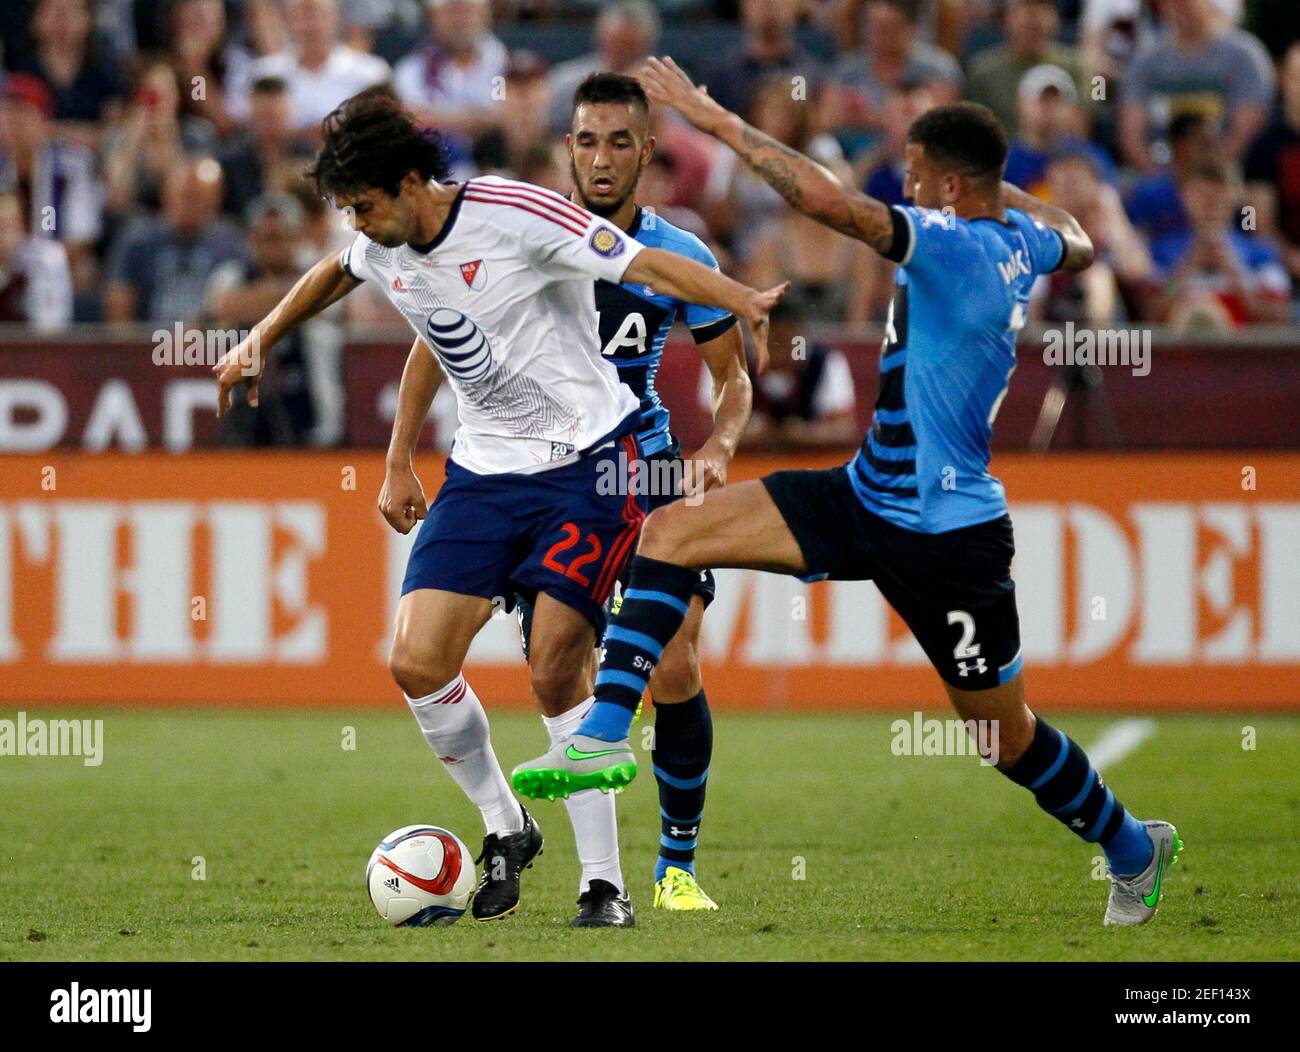 Football - MLS All-Stars v Tottenham Hotspur - AT&T MLS All Stars Game - Pre Season Friendly - Dick's Sporting Goods Park, Colorado, United States of America - 29/7/15  Tottenham's Kyle Walker (R) and Nabil Bentaleb (C) in action with MLS All-Star's Kaka   Action Images via Reuters / Rick Wilking  Livepic Stock Photo